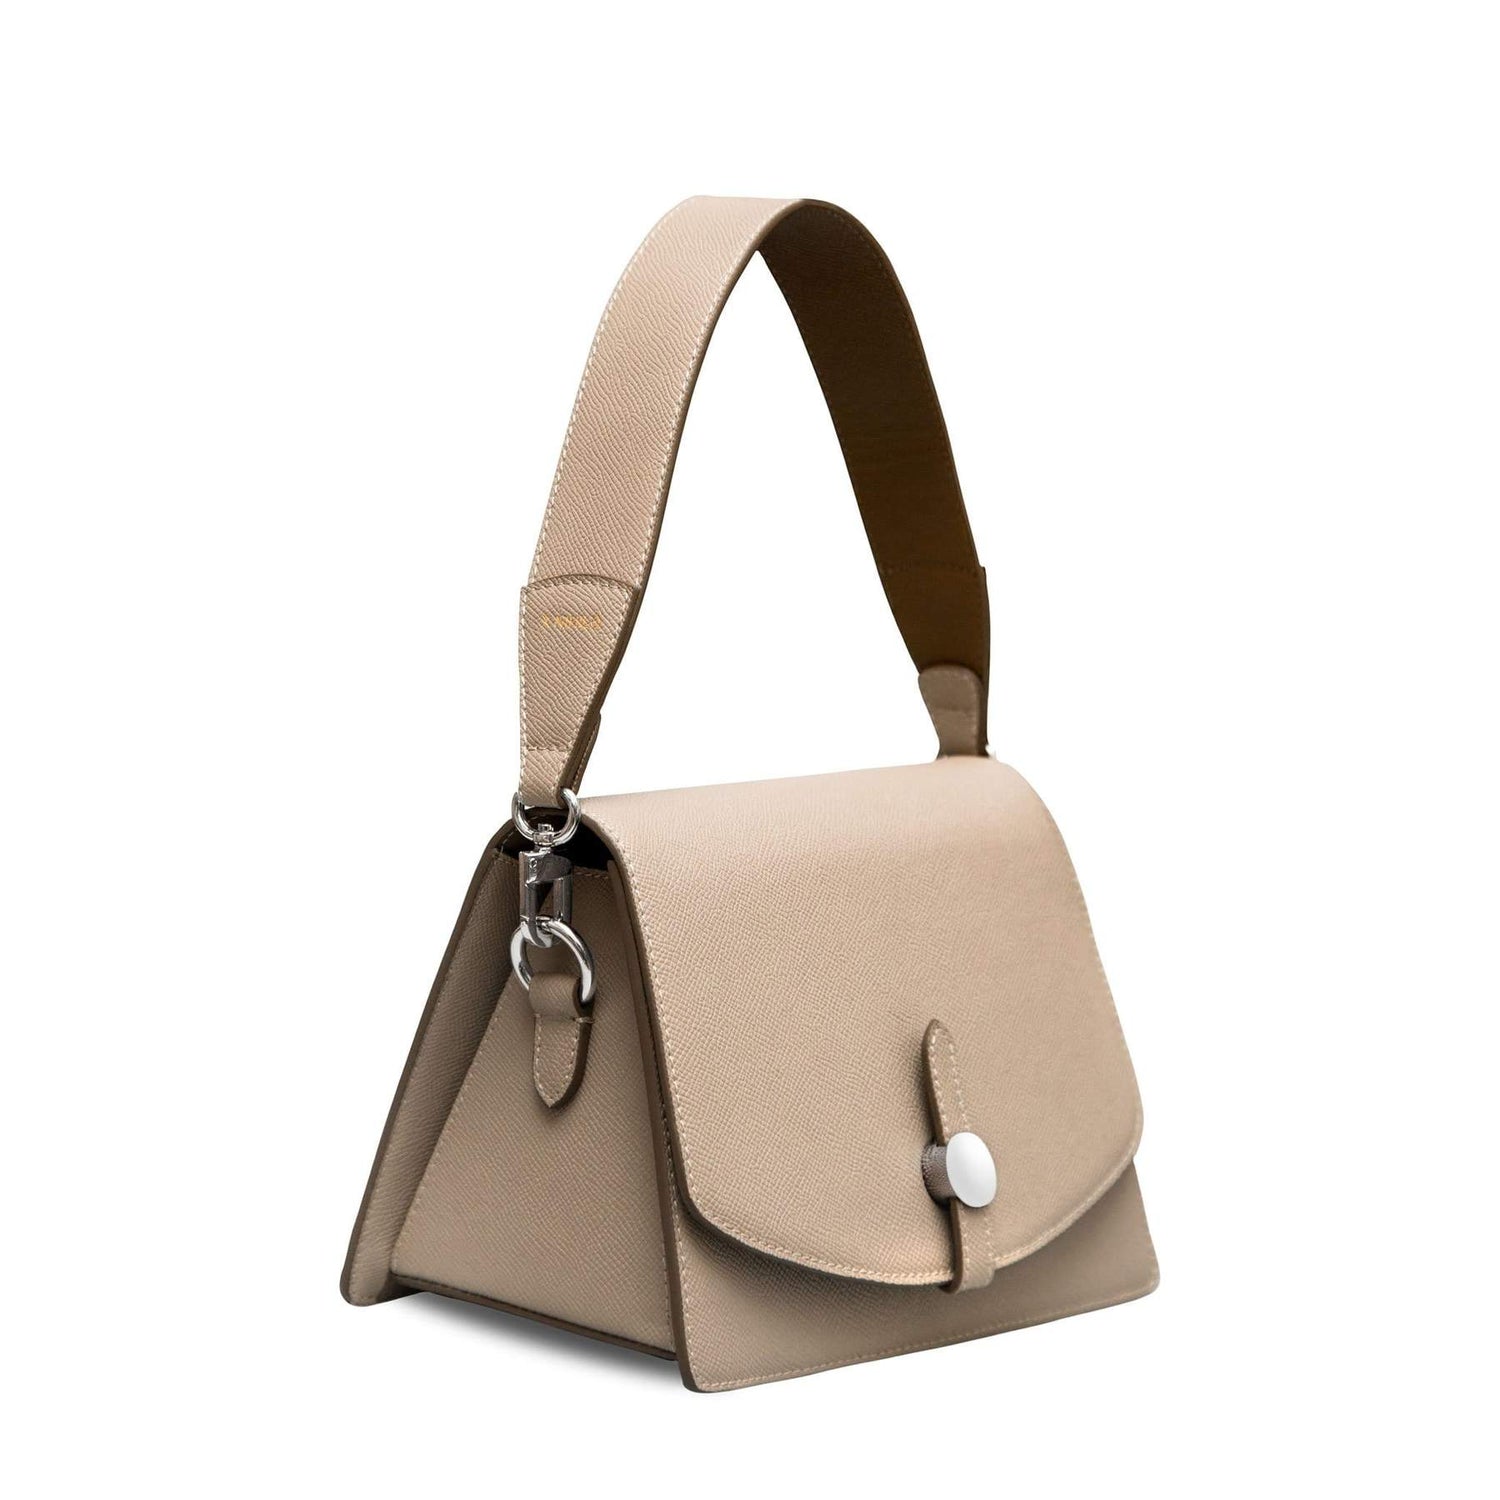 X NIHILO - TRINITY  LEATHER SHOULDER BAG - BEIGE With strap lifted